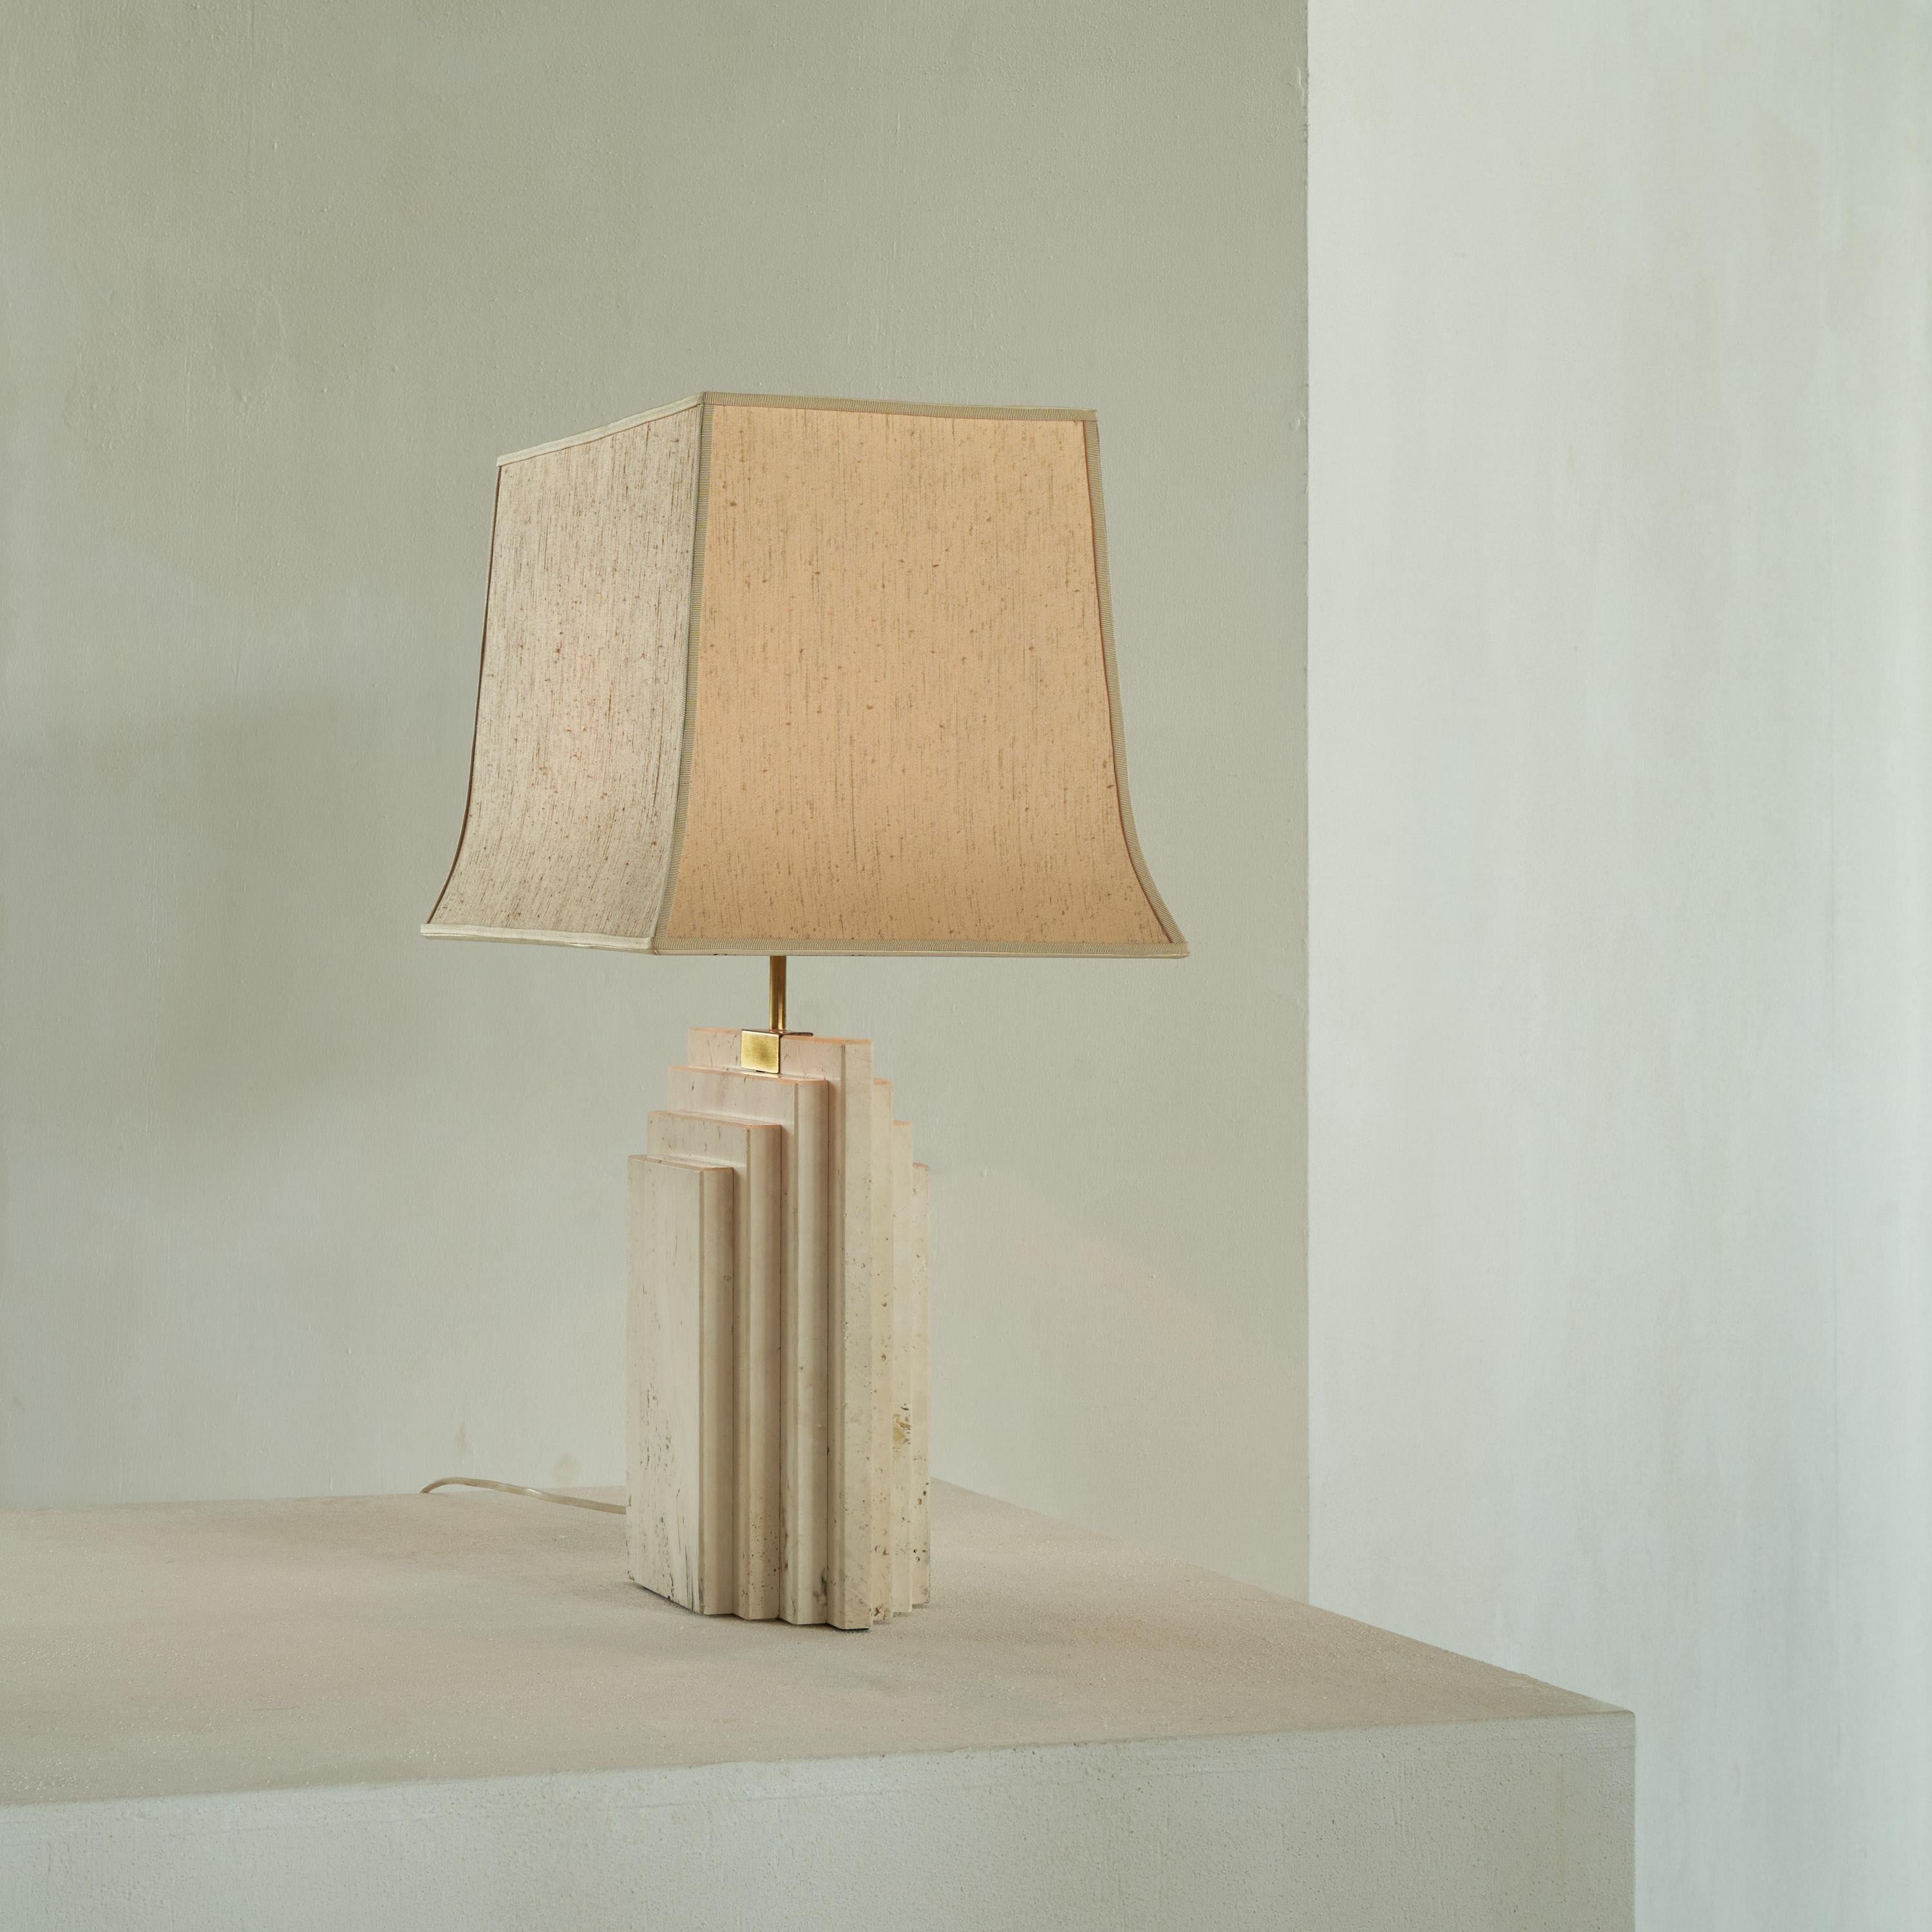 20th Century Architectural Table Lamp in Travertine and Brass, Belgium, 1970s For Sale